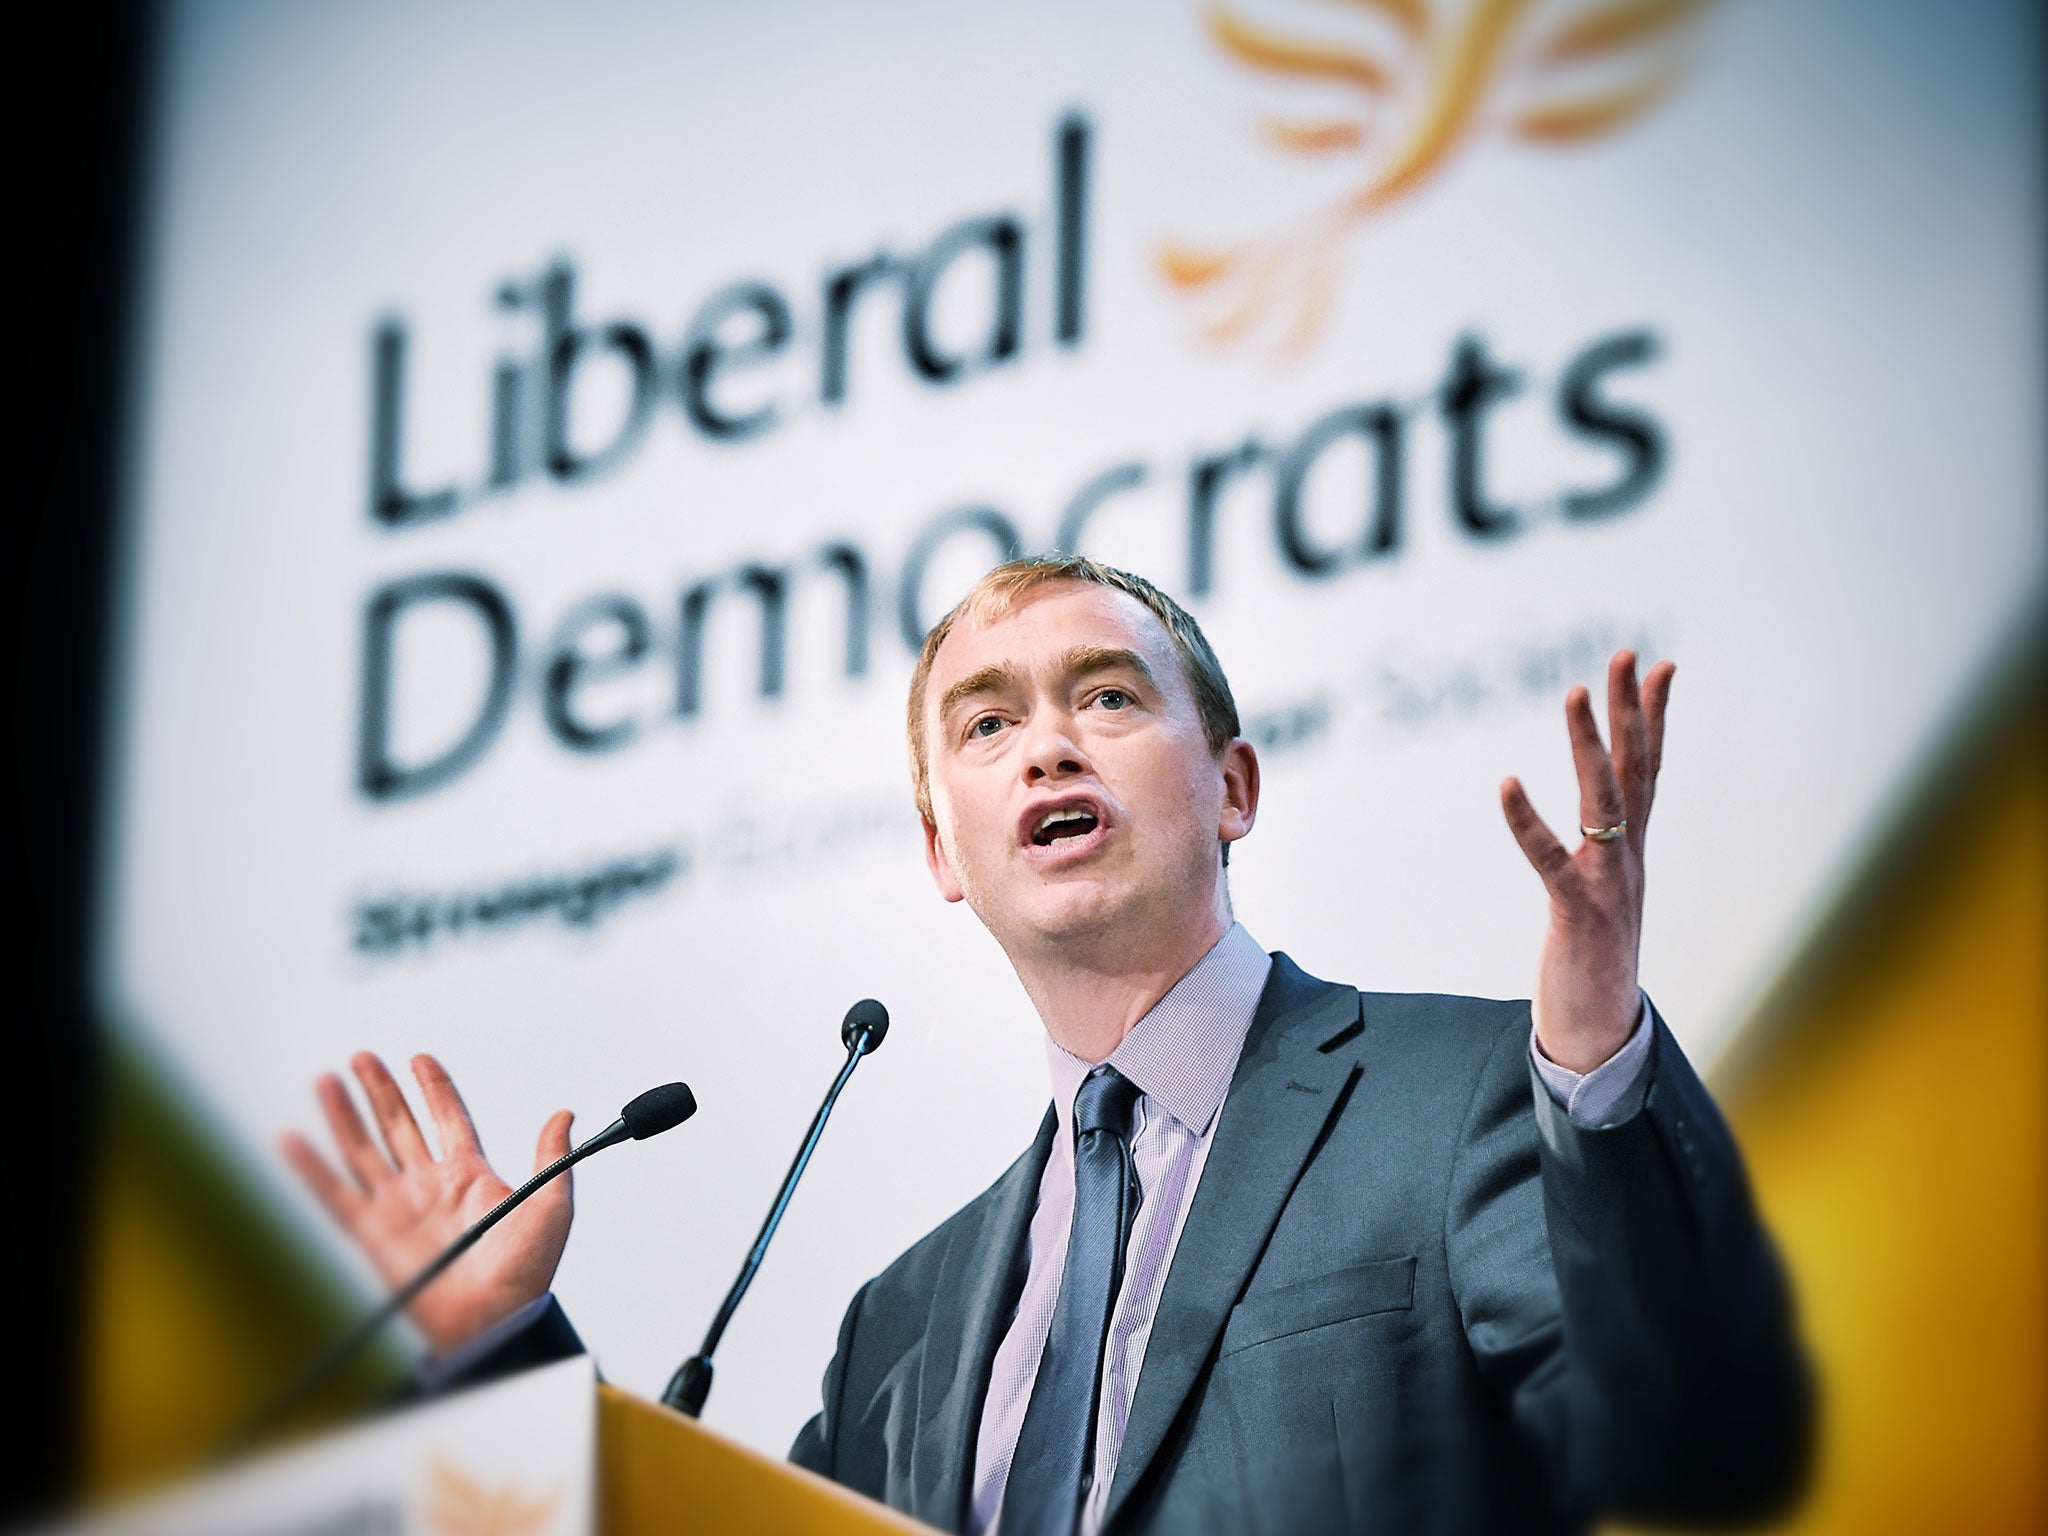 Mr Farron revealed that if he won the leadership of the Liberal Democrats the party would abandon trying to shadow every government department in the House of Commons, concentrating instead on a few key issues that motivated the party’s membership